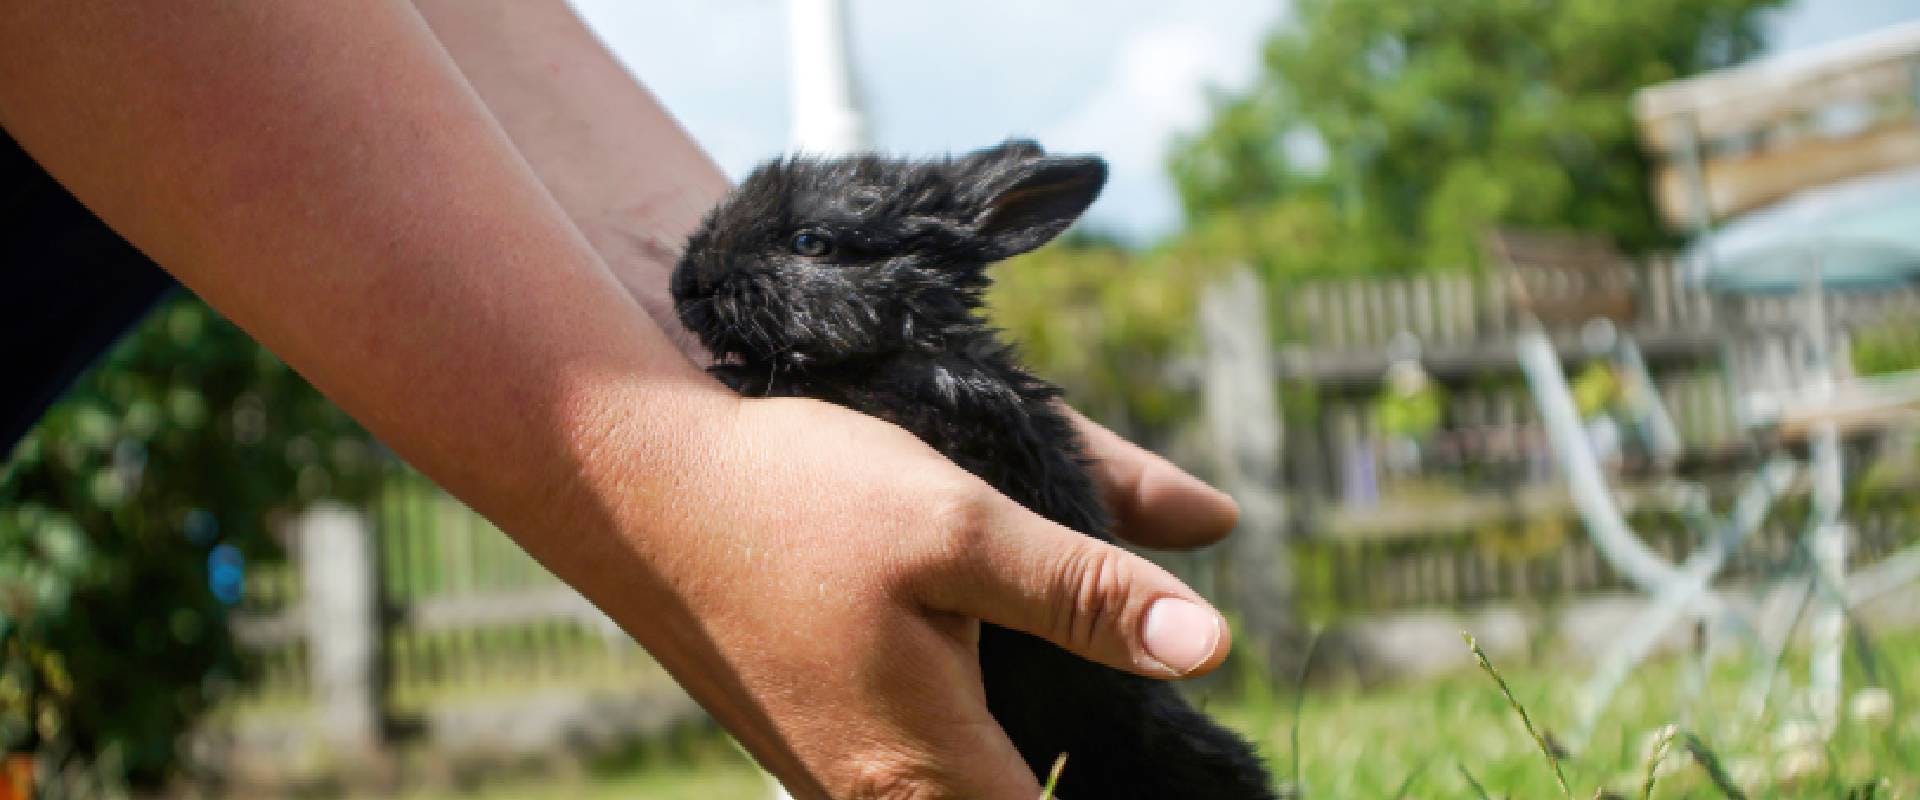 Person holding a baby black rabbit